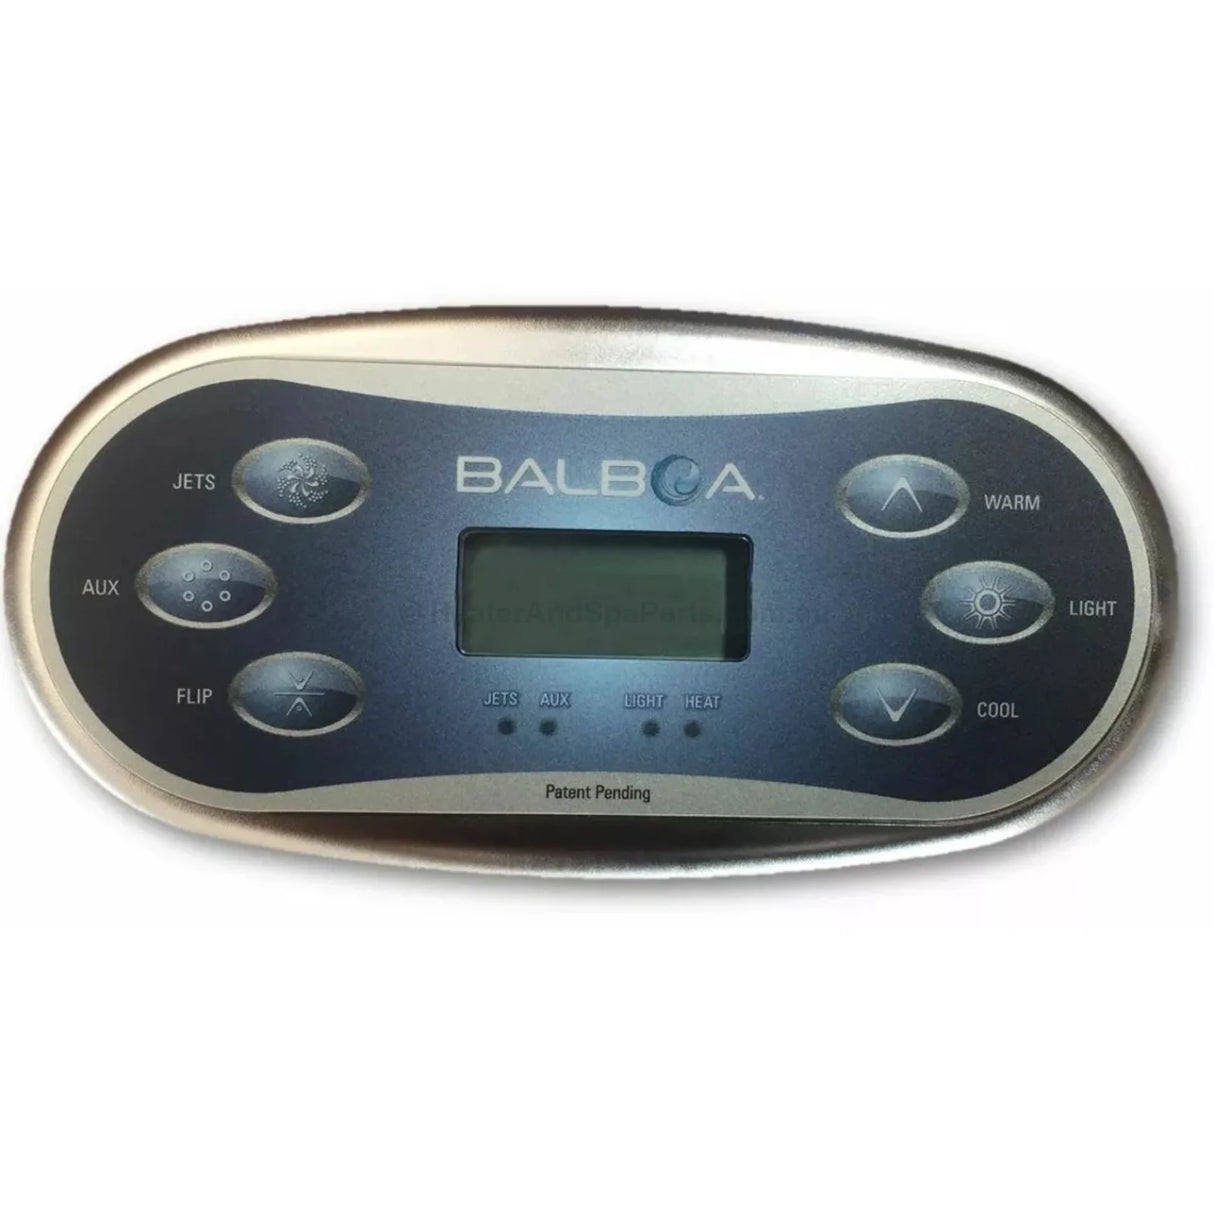 Balboa TP600 Touchpad Keypad Control Panel - 6 button oval - Heater and Spa Parts